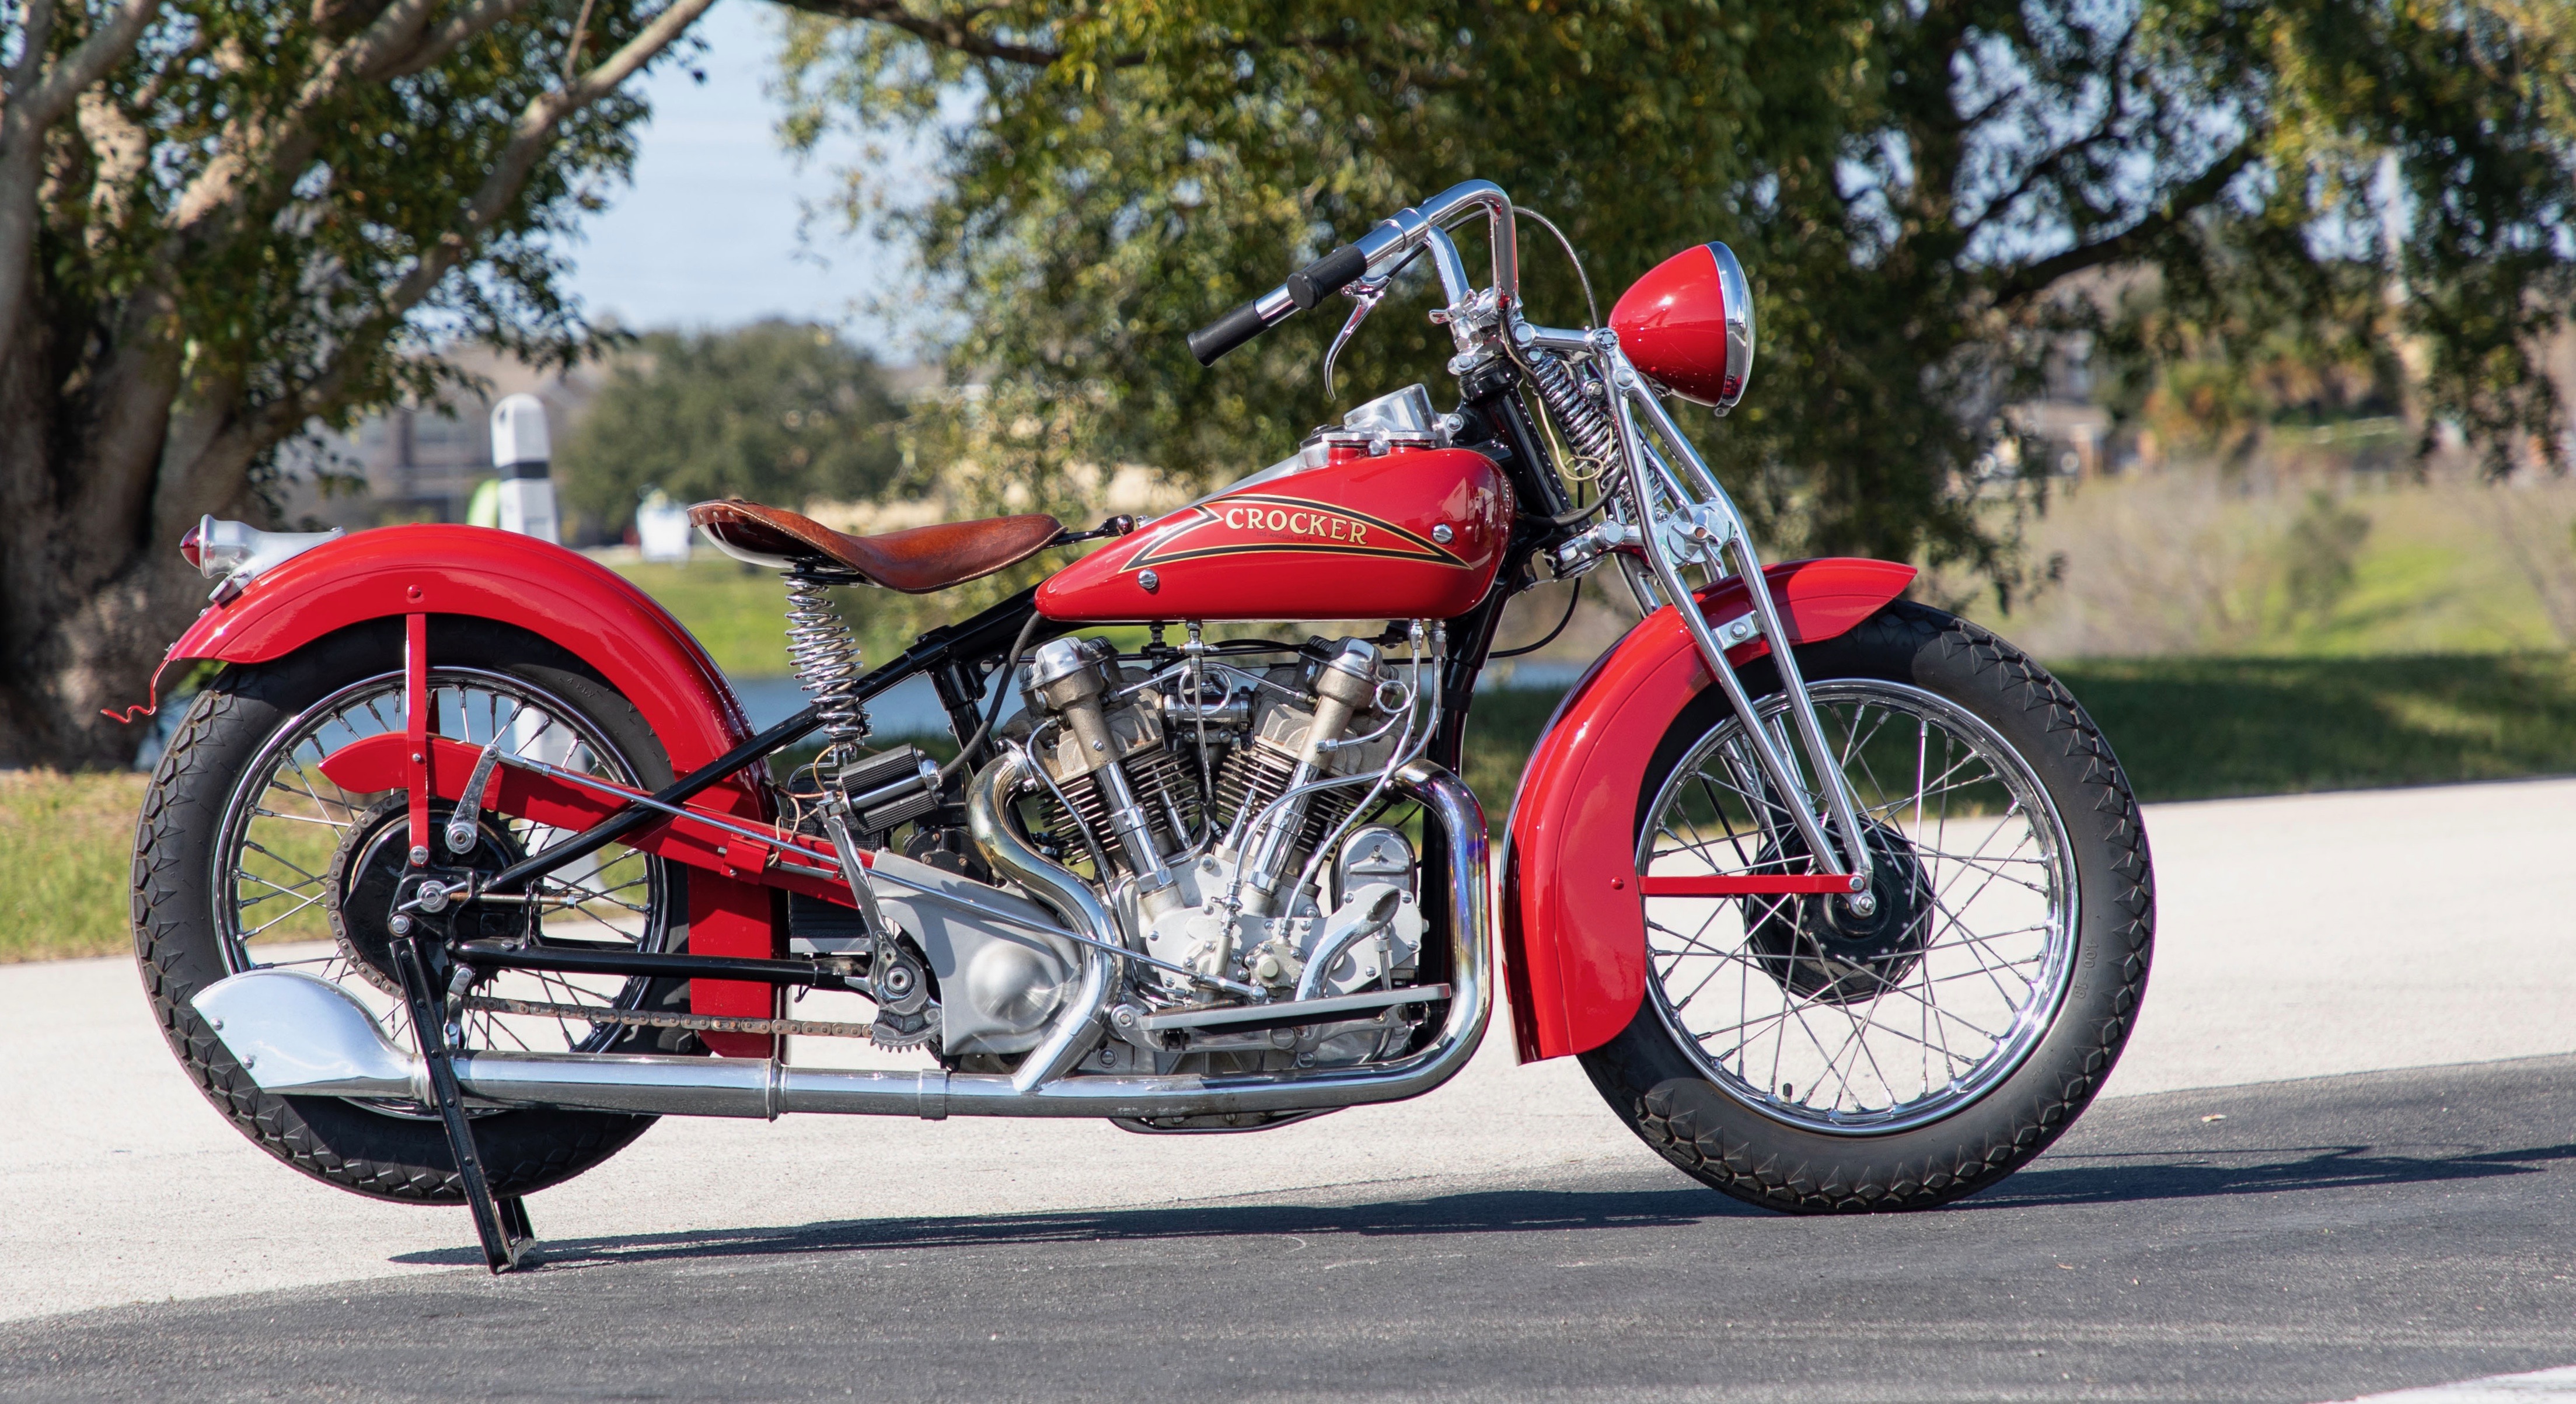 Motorcycle auction, Mecum readies for world’s largest vintage motorcycle auction, ClassicCars.com Journal